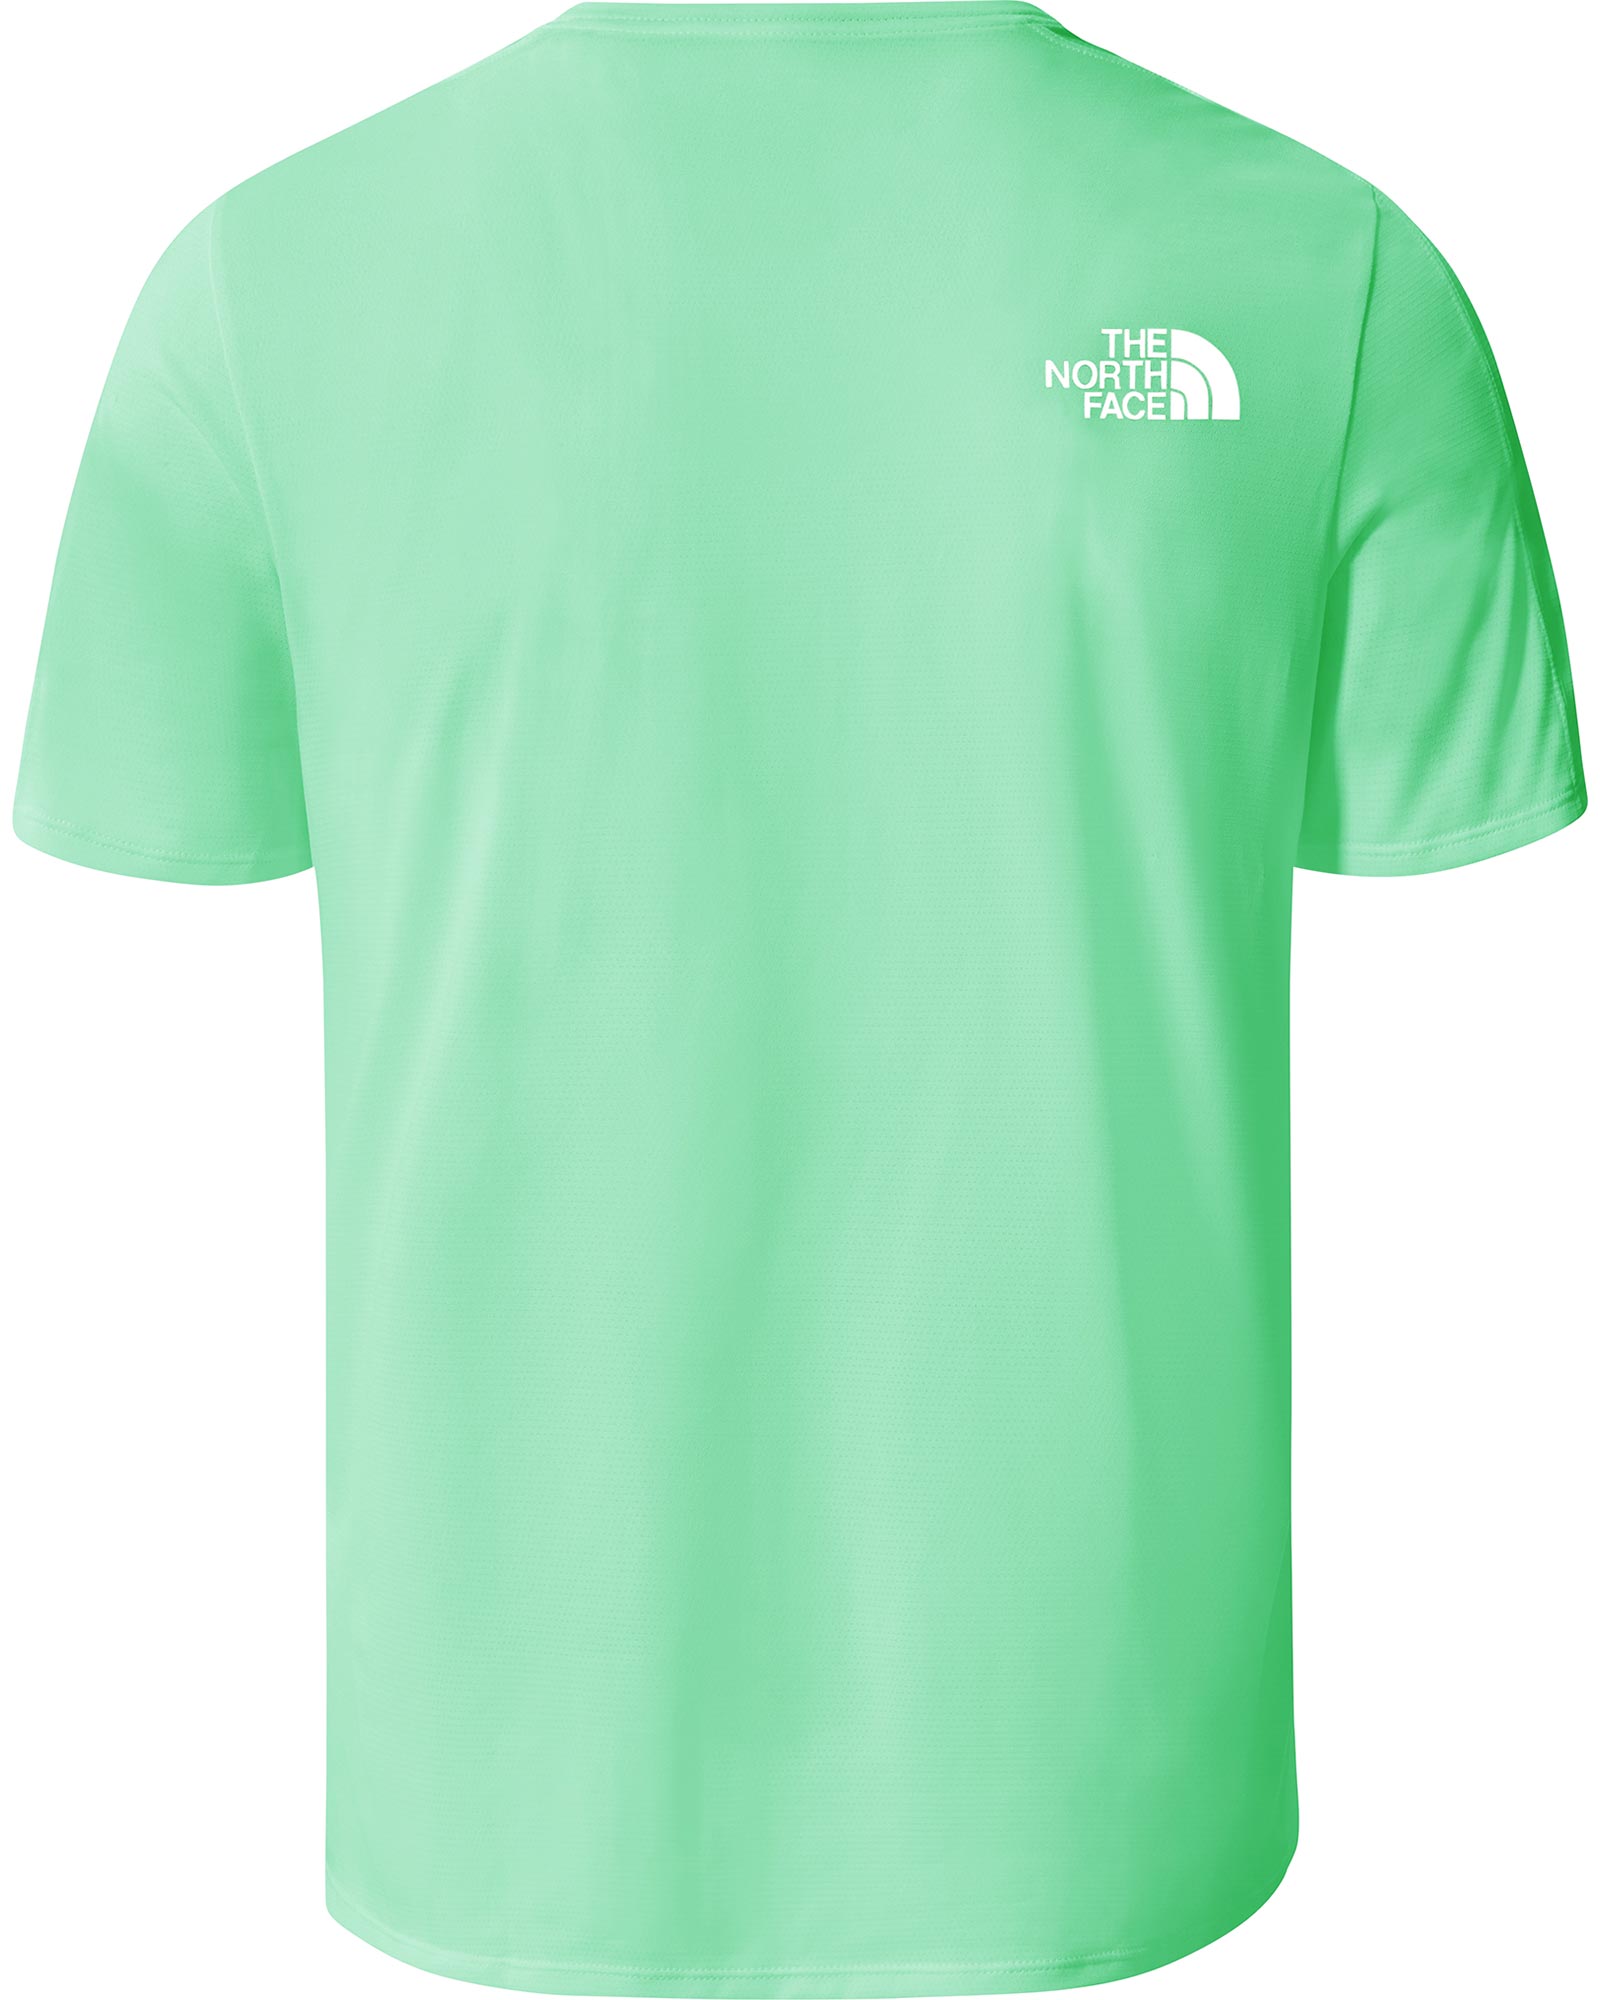 The North Face Flight Better Than Naked Mens T-shirt